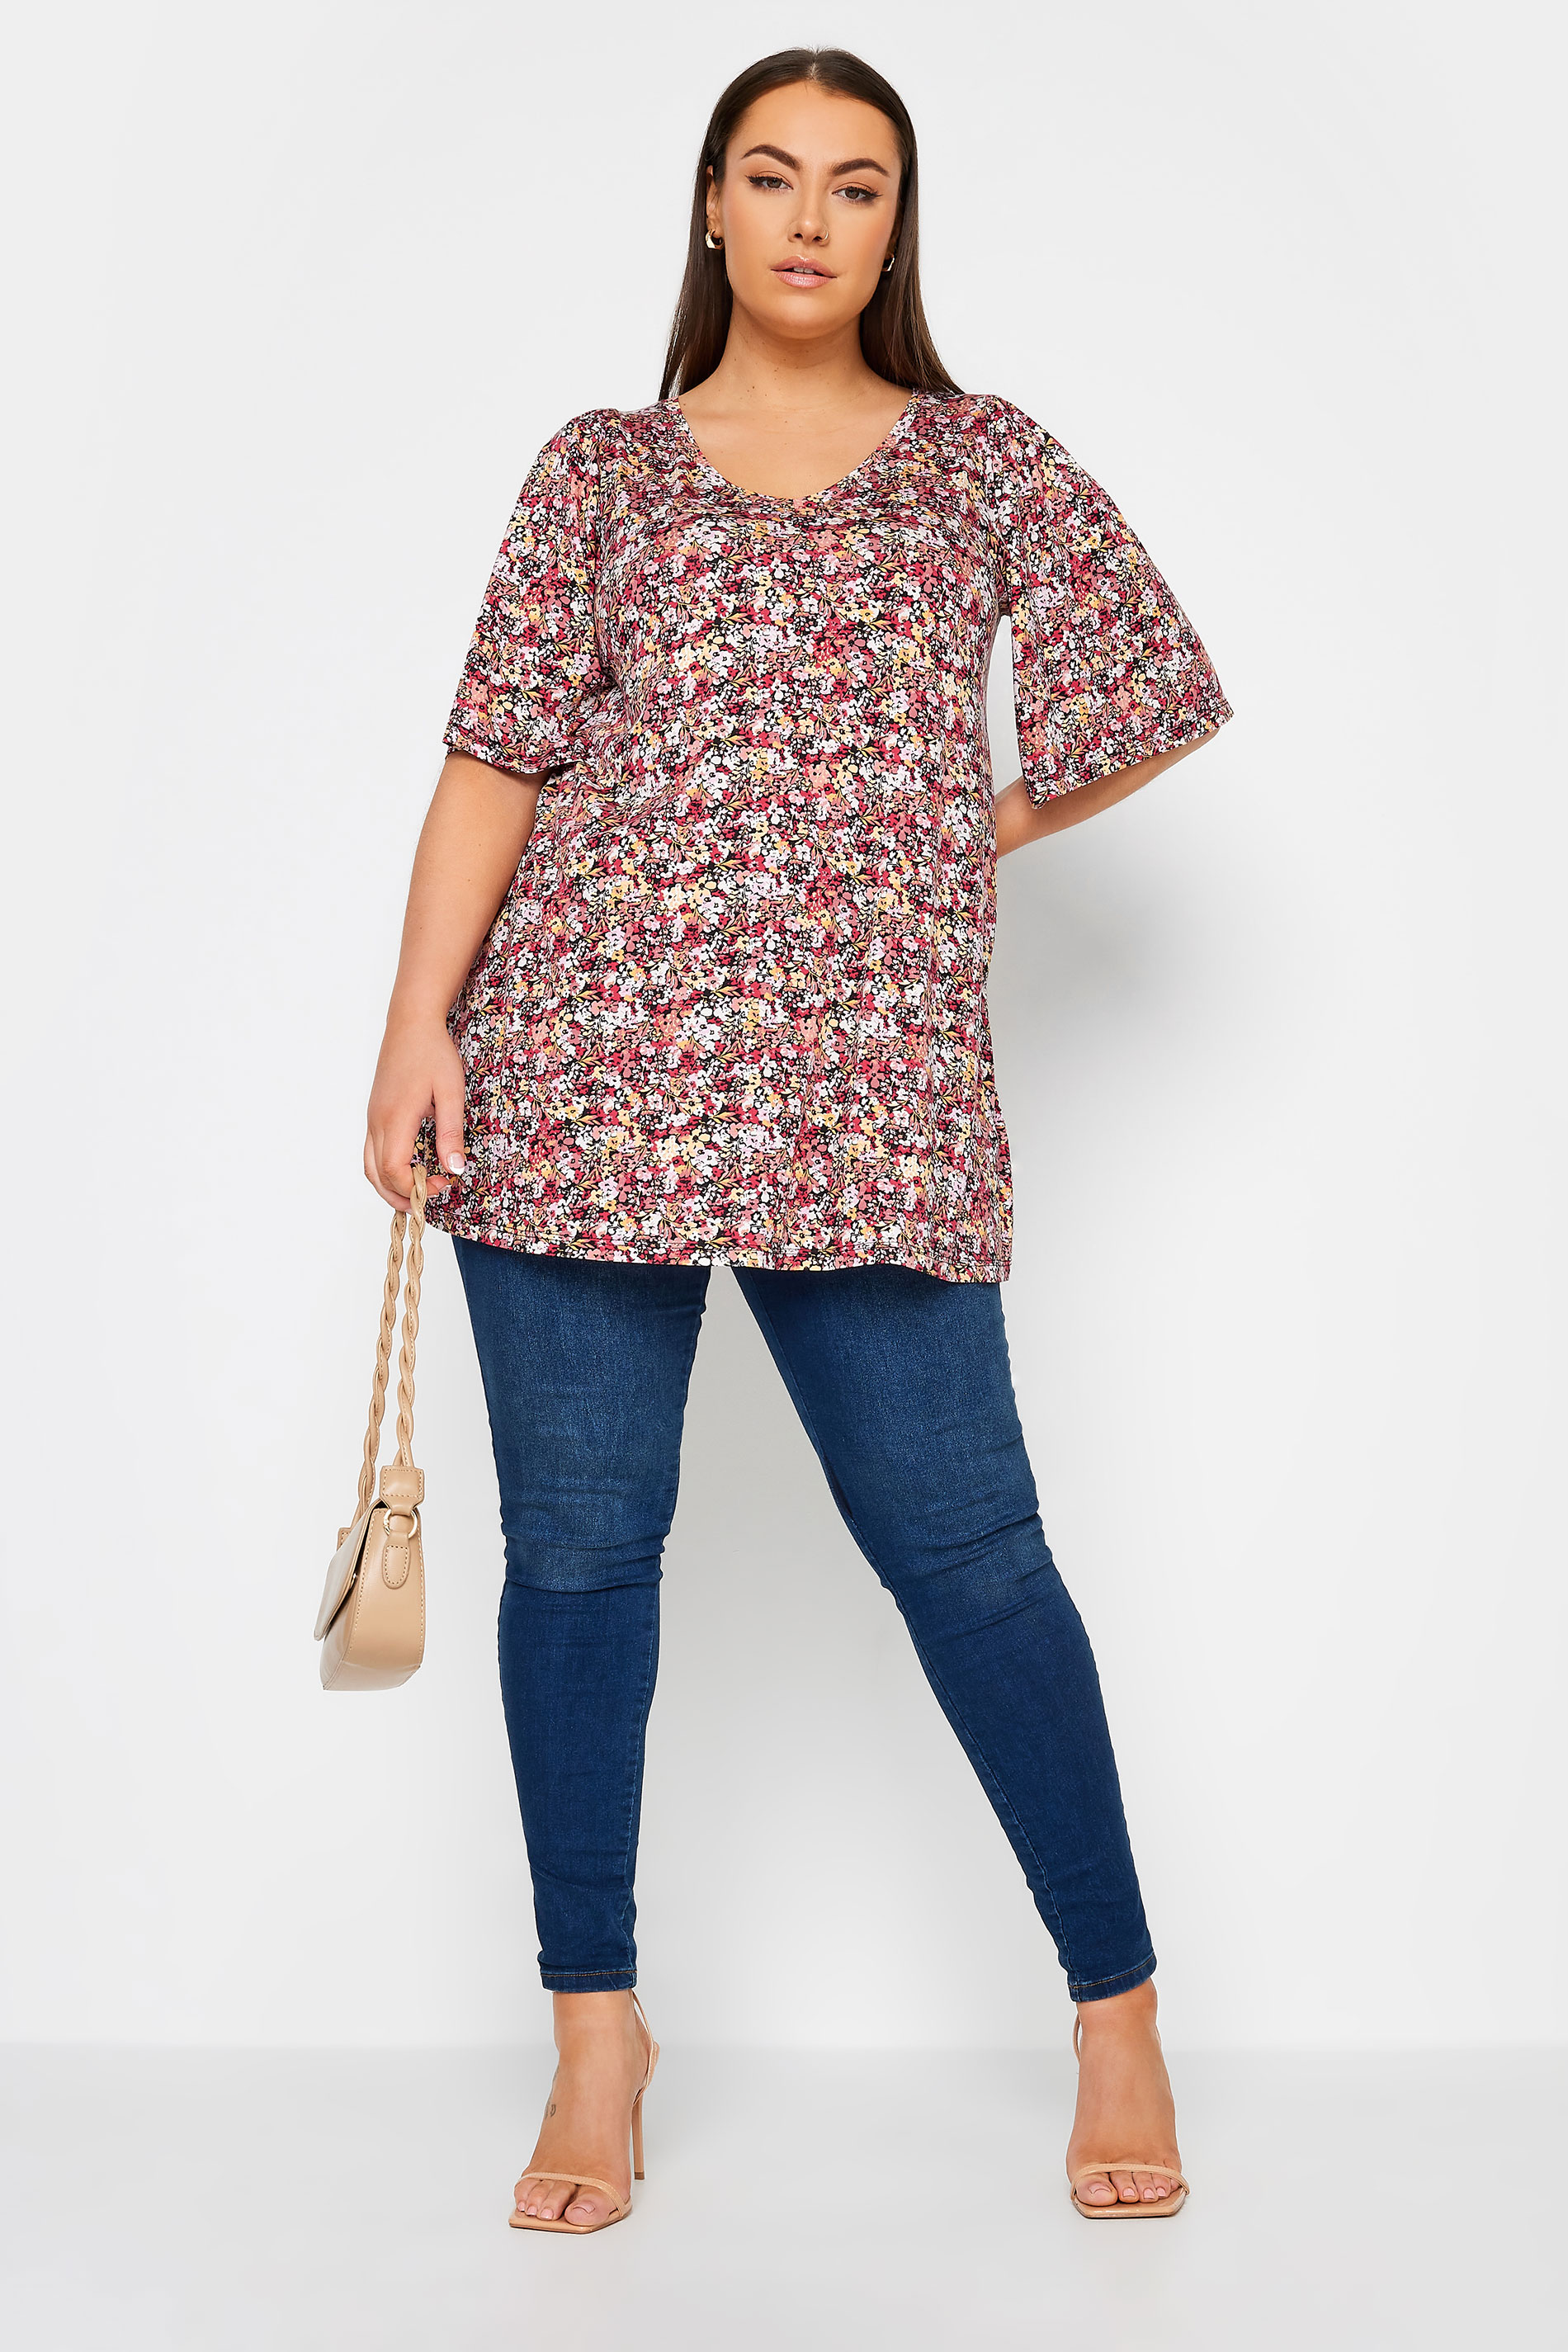 YOURS Plus Size Red & Pink Floral Print Angel Sleeve Top | Yours Clothing